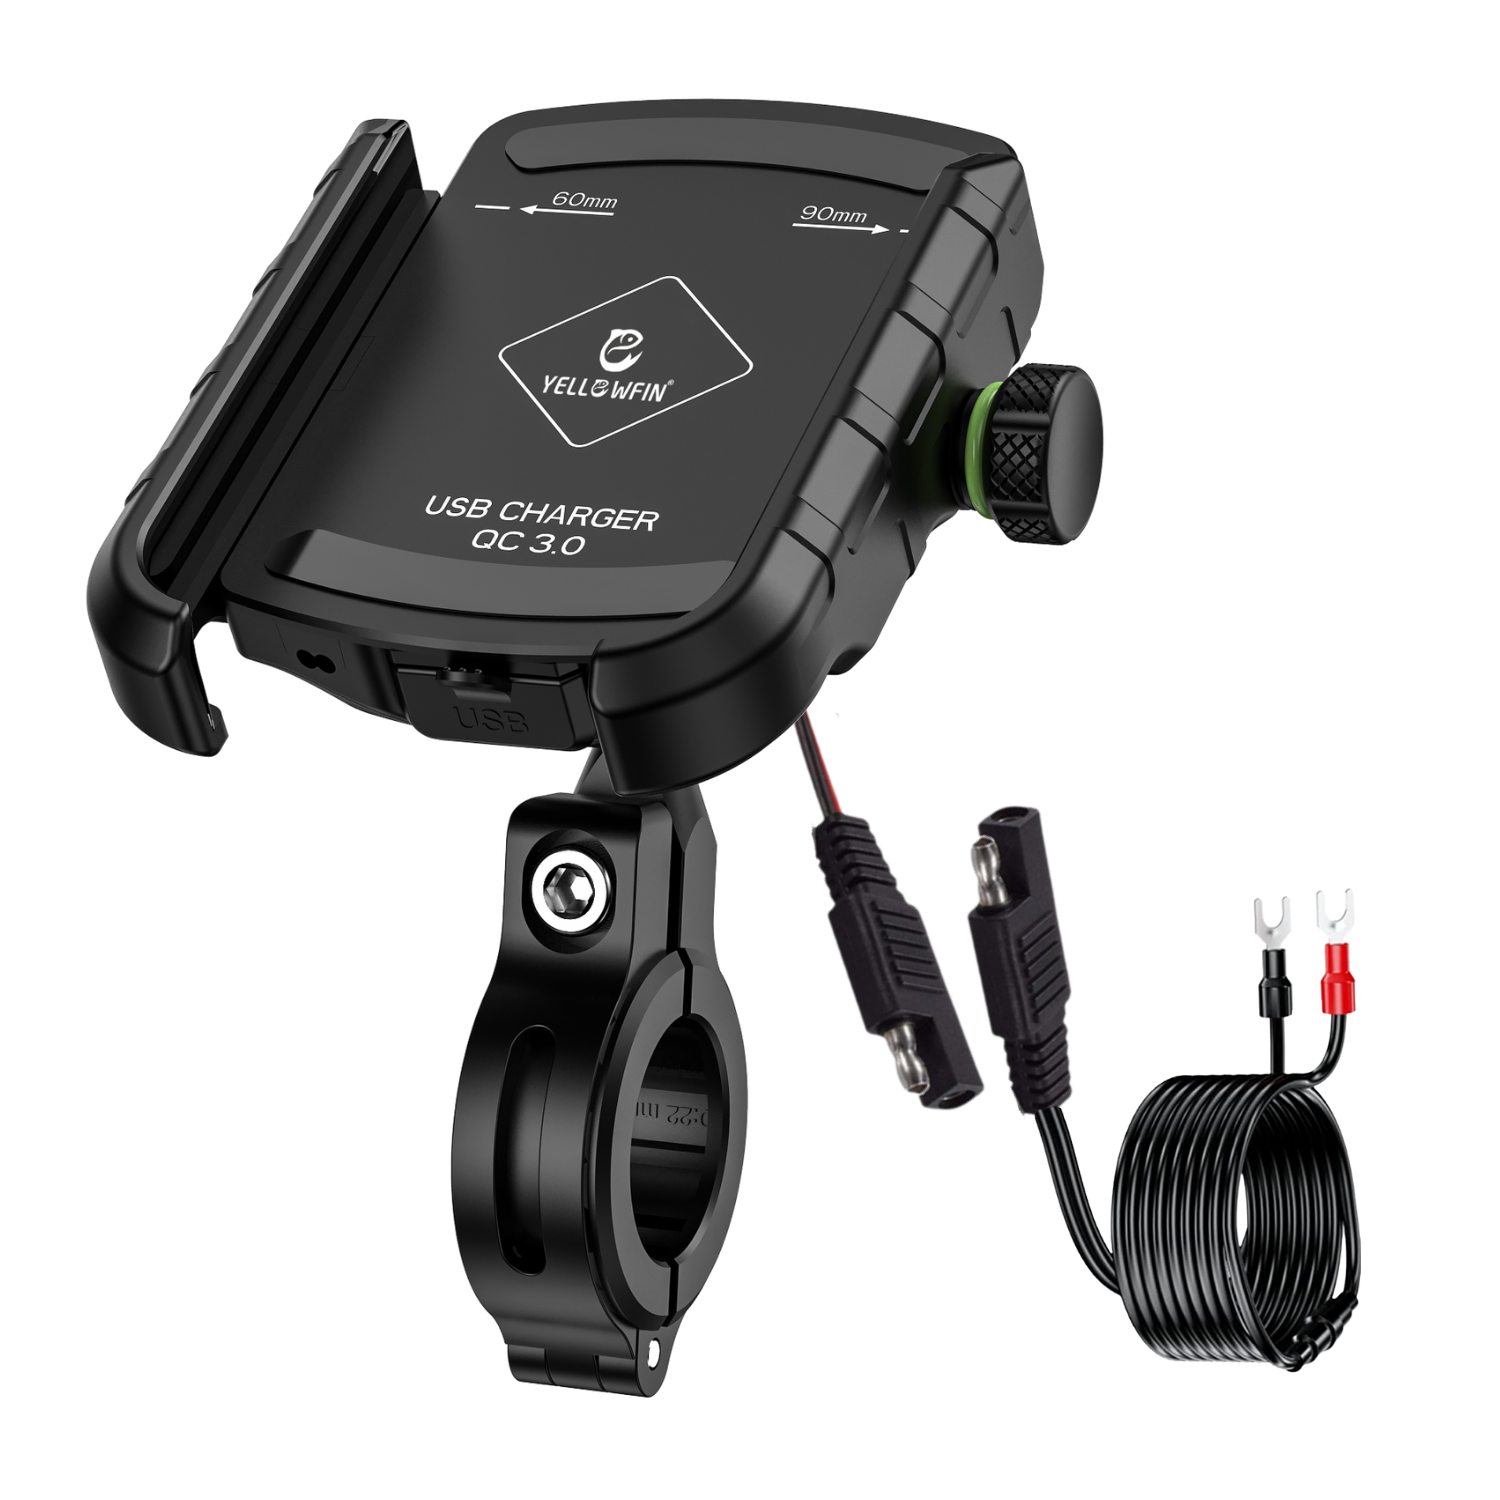 Jaw Grip Bike Mobile Phone Holder with Fast USB QC 3.0 Charger & SAE Pin